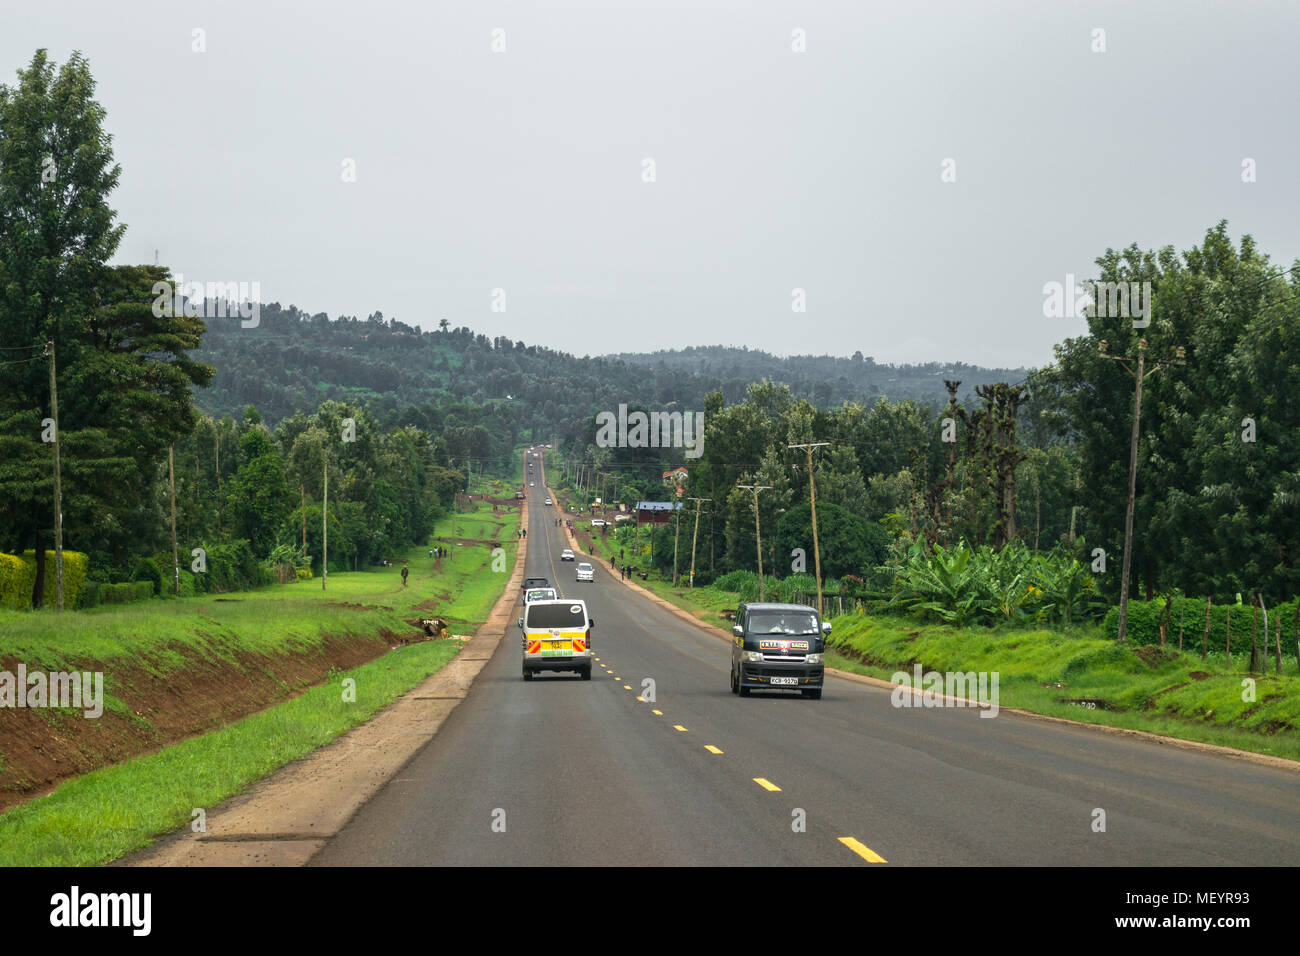 A typical highway with vehicles and people on it, lined by trees and forest on an overcast day, Kenya Stock Photo